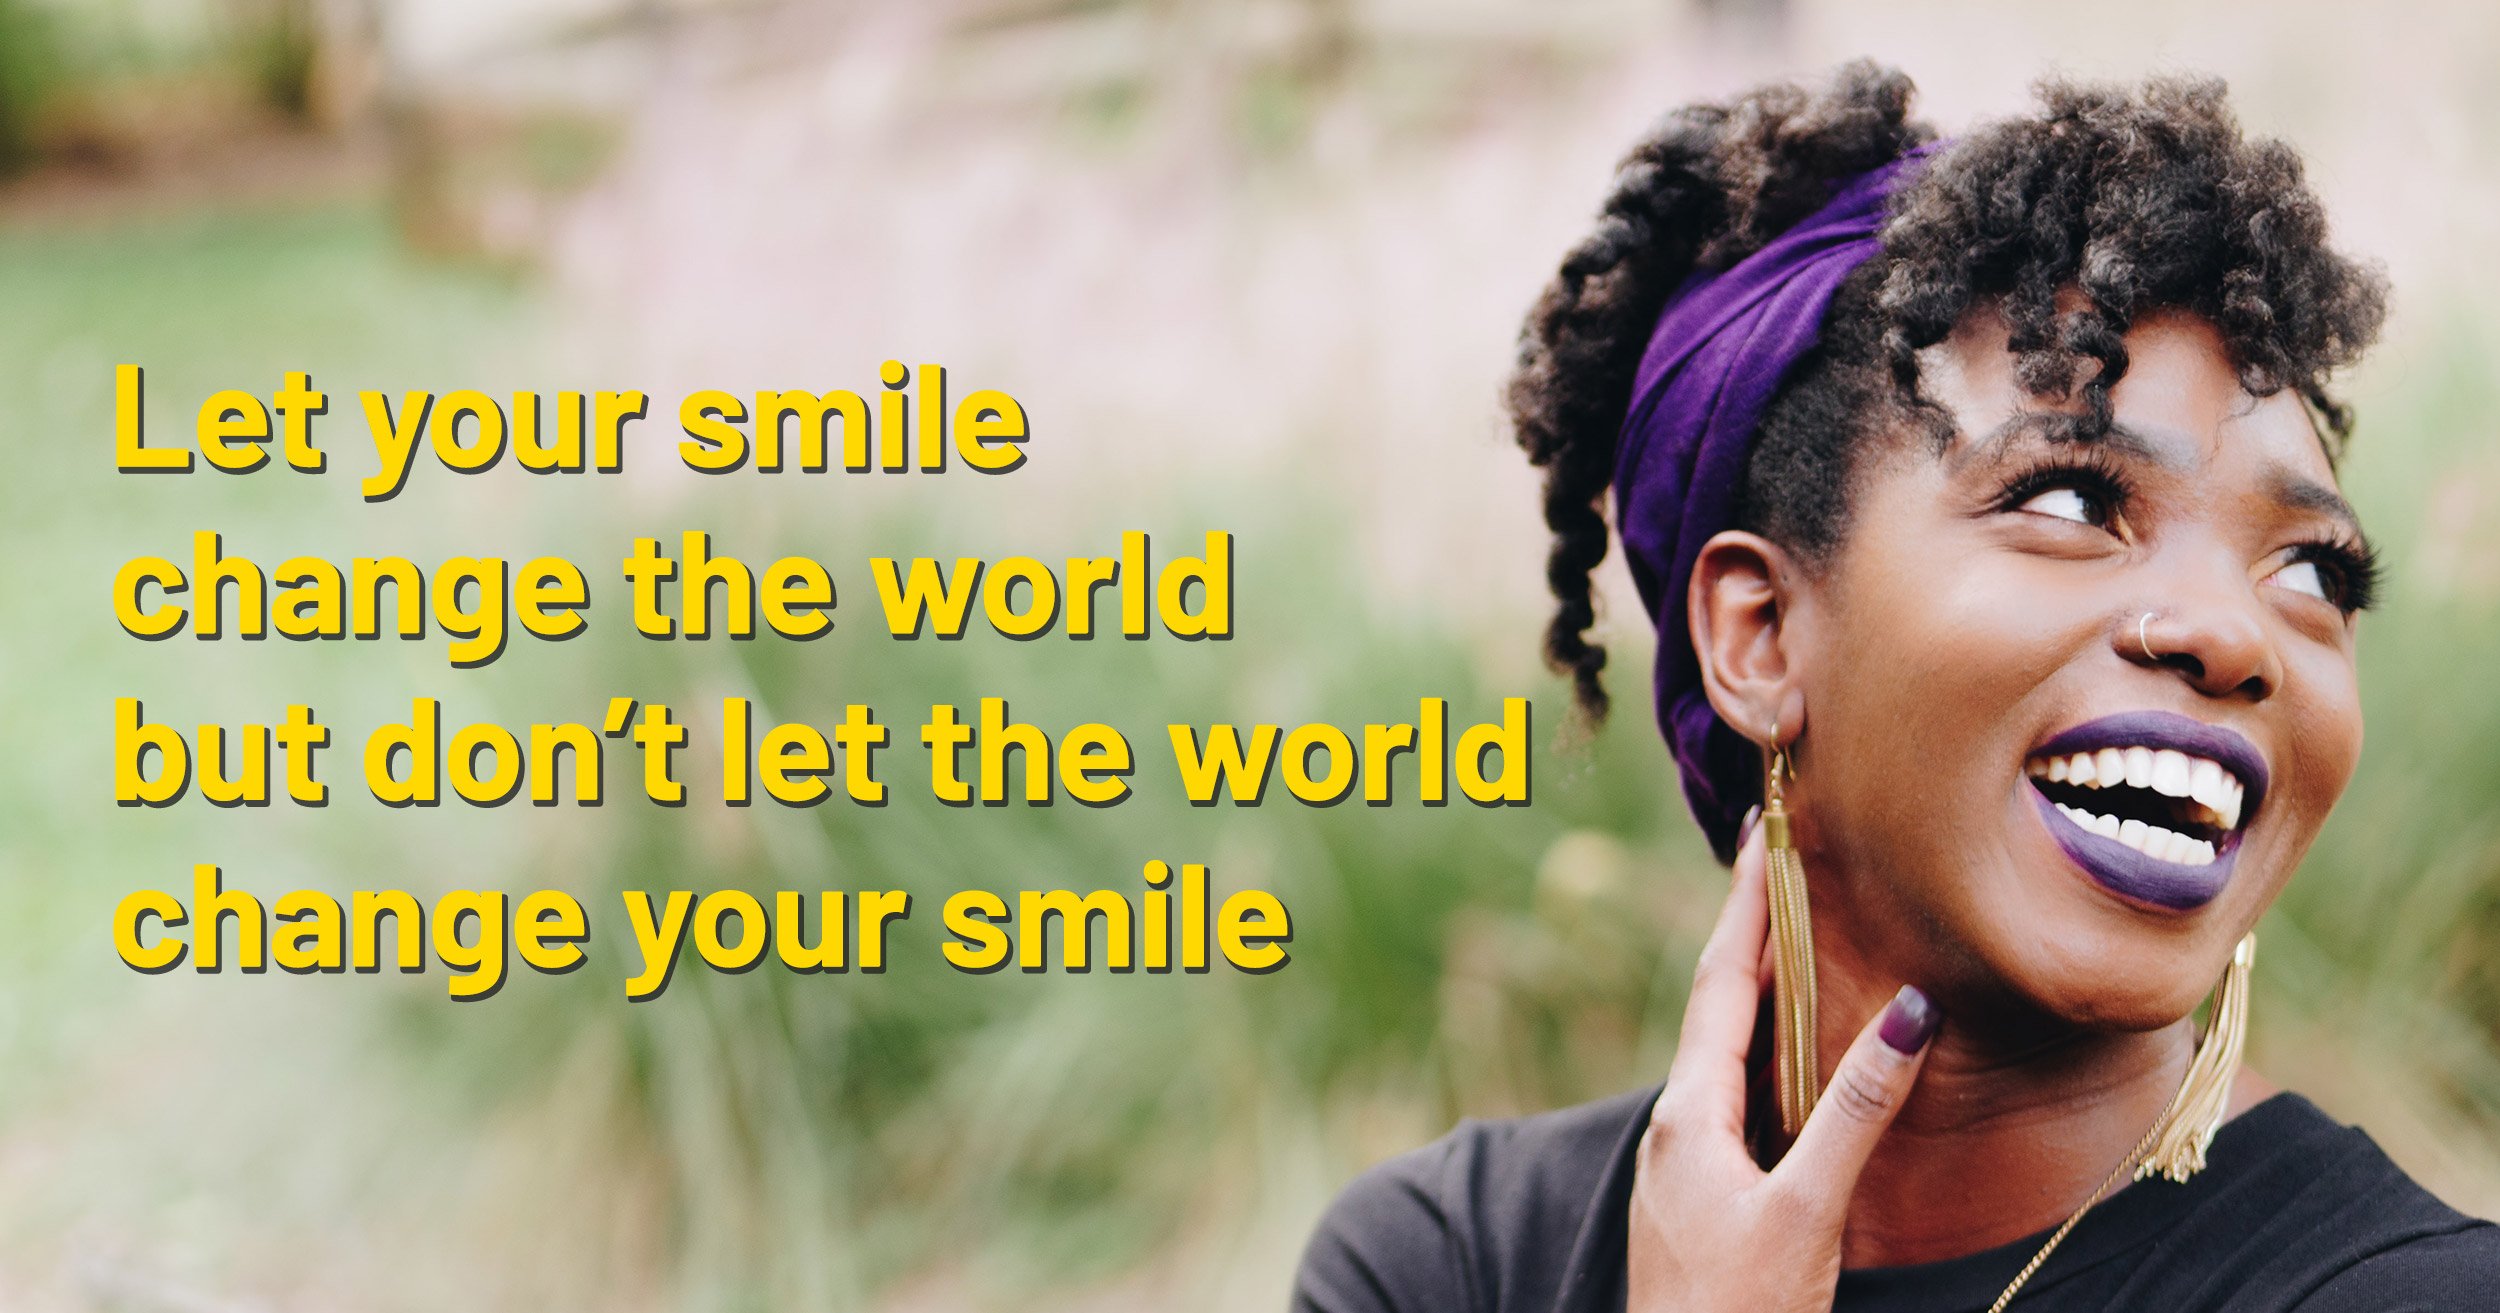 Change the world with your smile